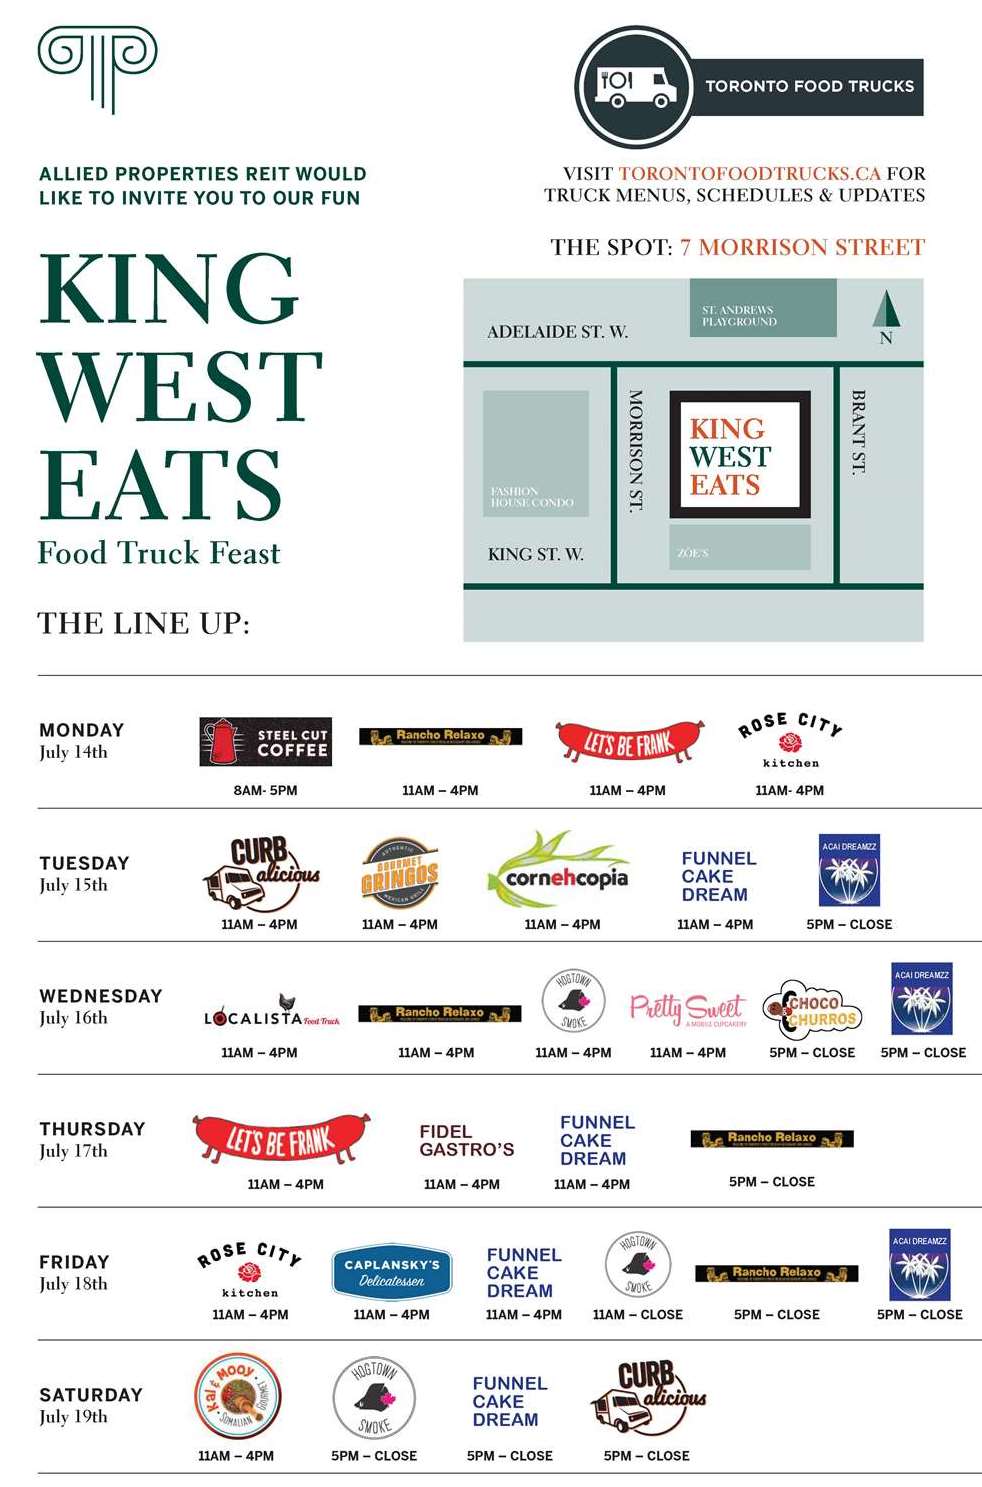 Allied-24x36-KING WEST EATS EMAIL-2014 (2)